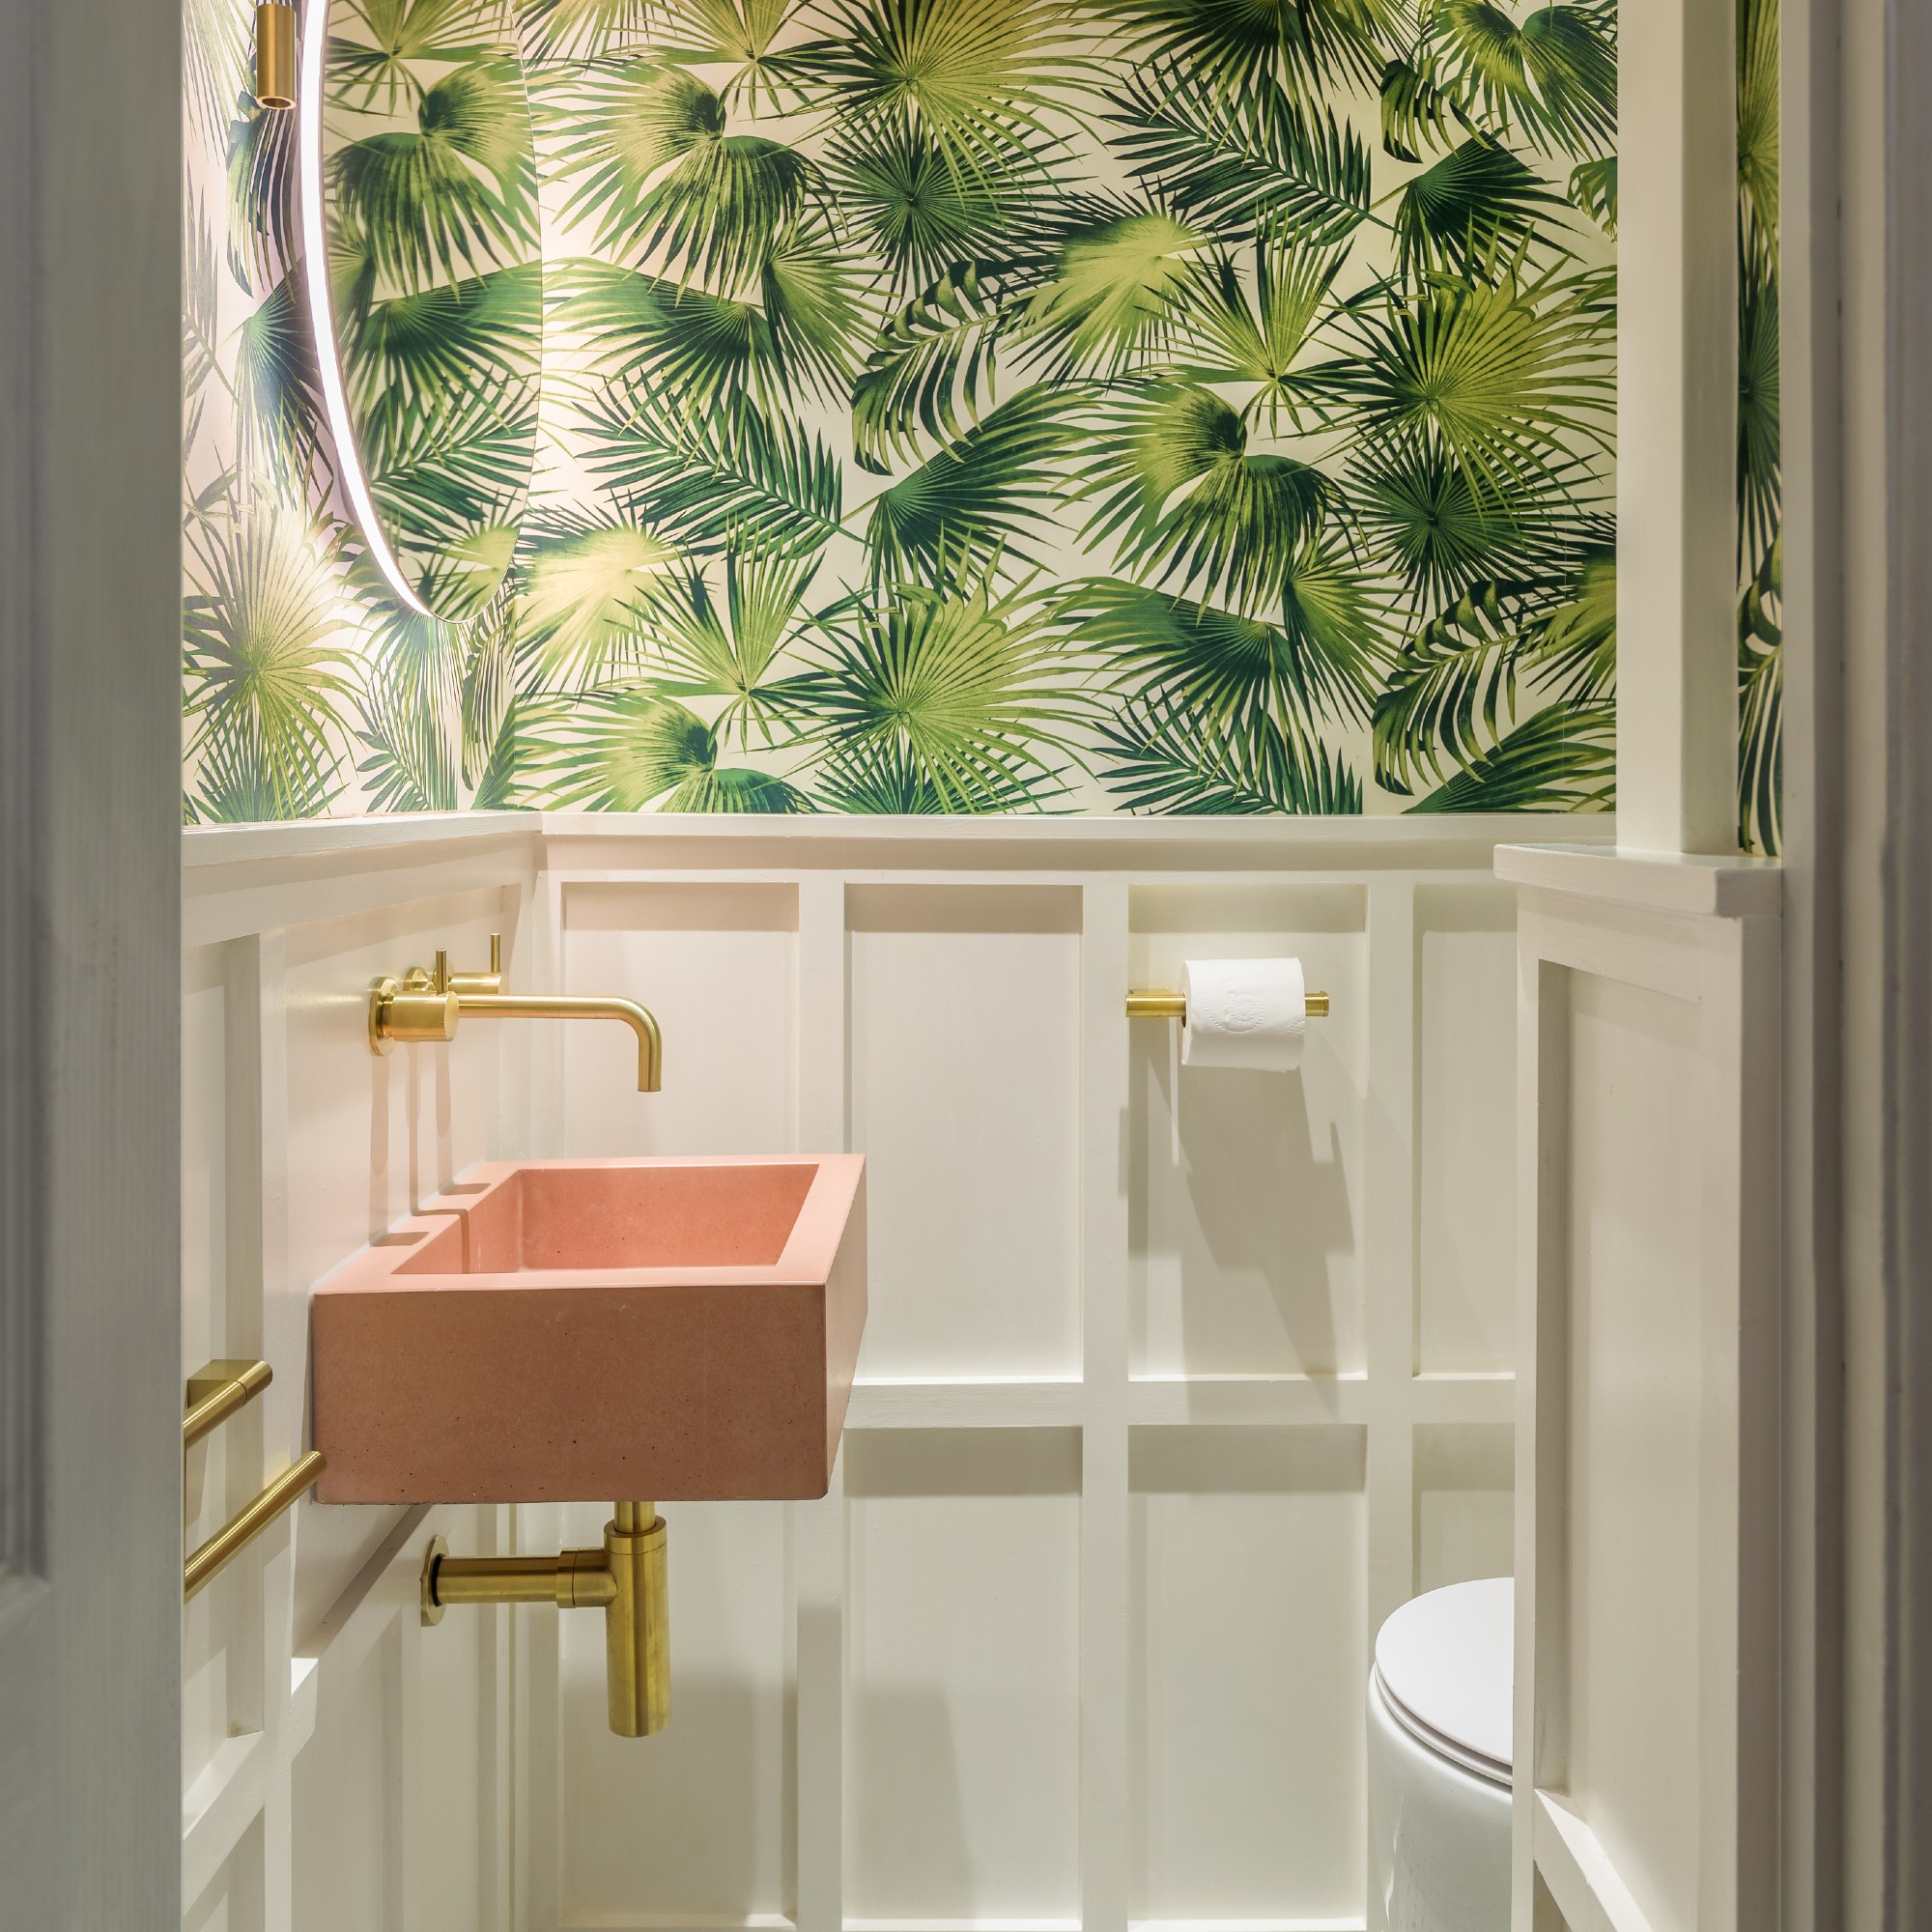 A cloakroom with a pink sink and a tropical wallpaper